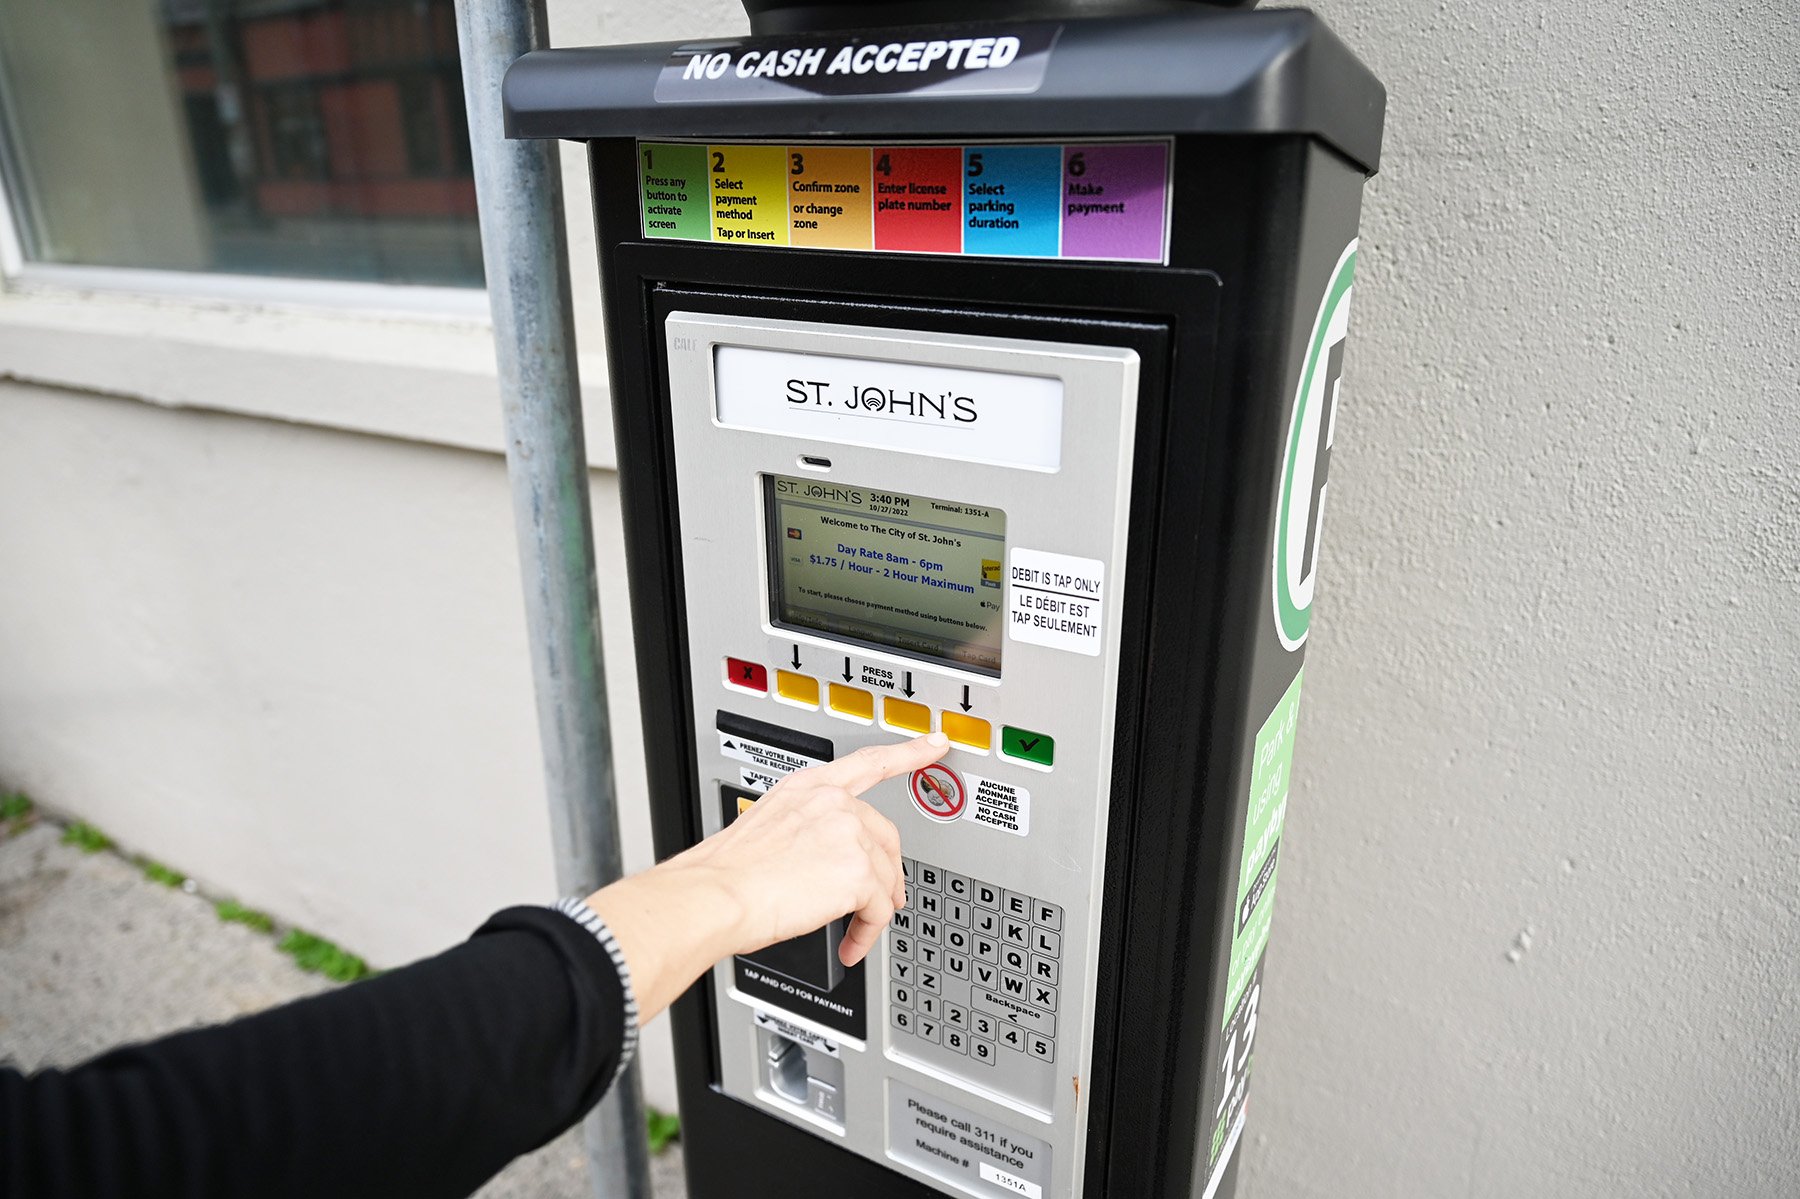 A person's hand is reaching out to press a button on a parking pay station.